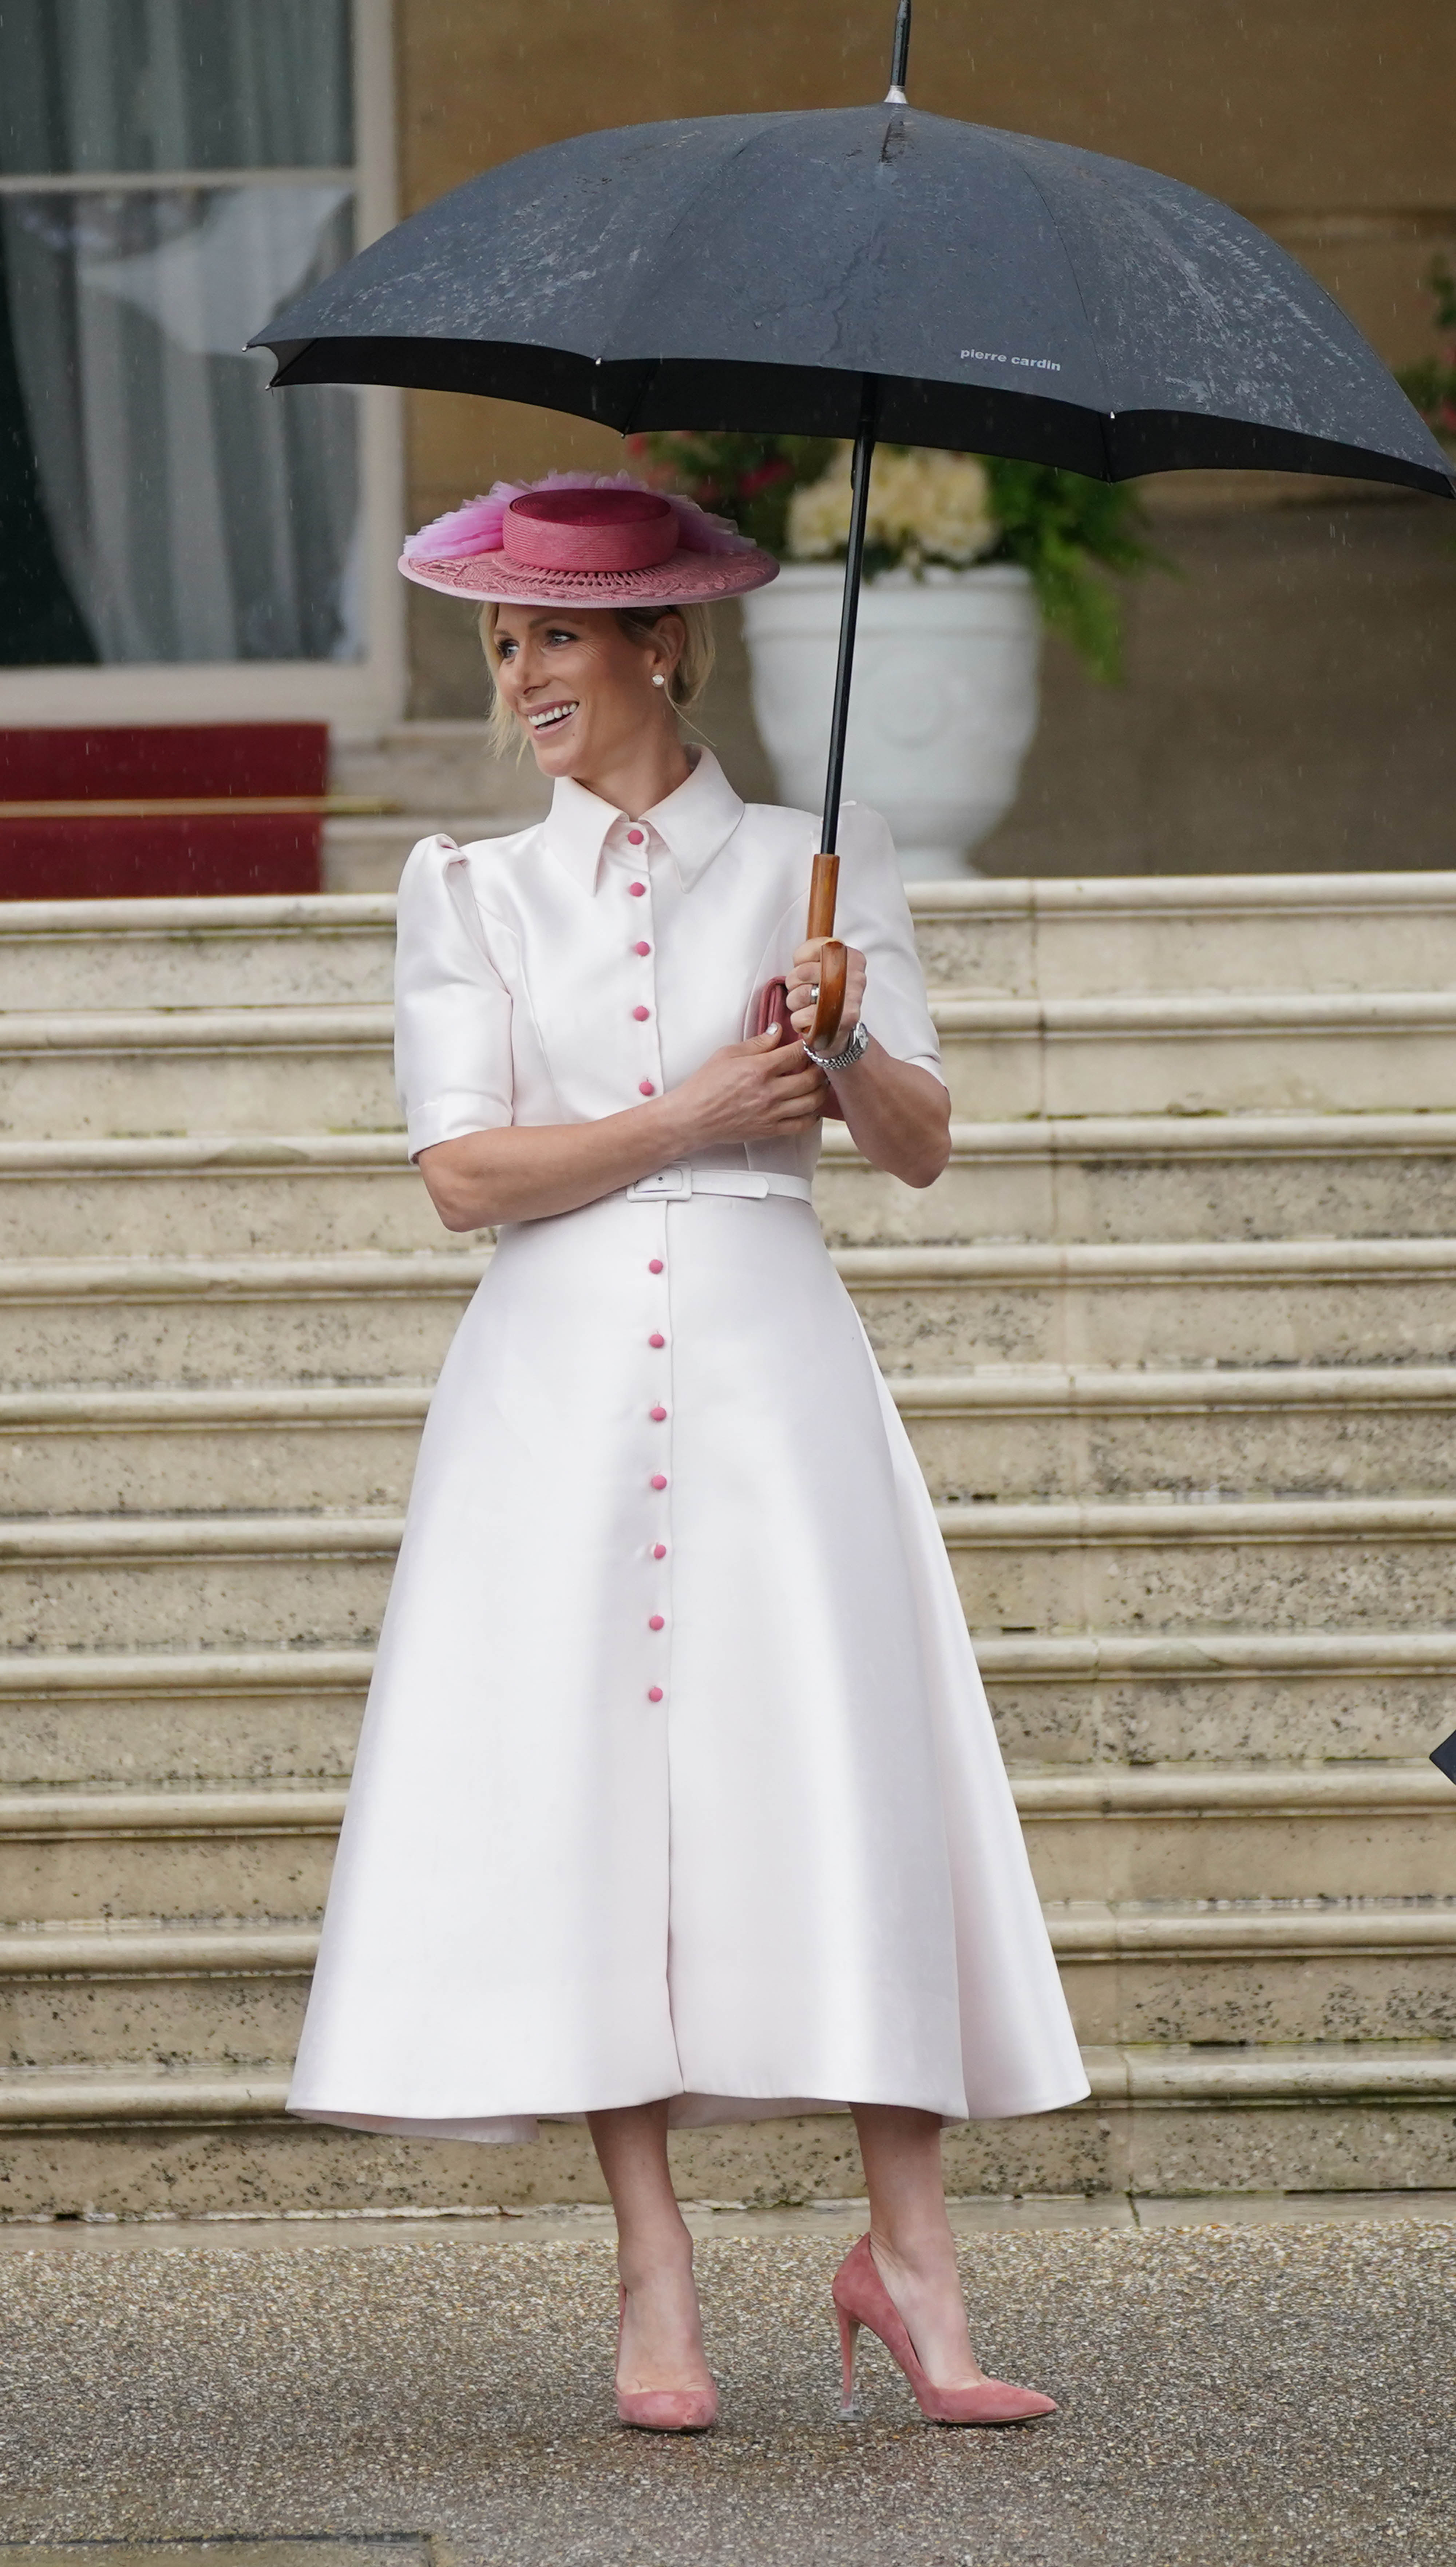 Zara Tindall carries an umbrella at the Sovereign's Garden Party on May 21, 2024, in London, England. | Source: Getty Images